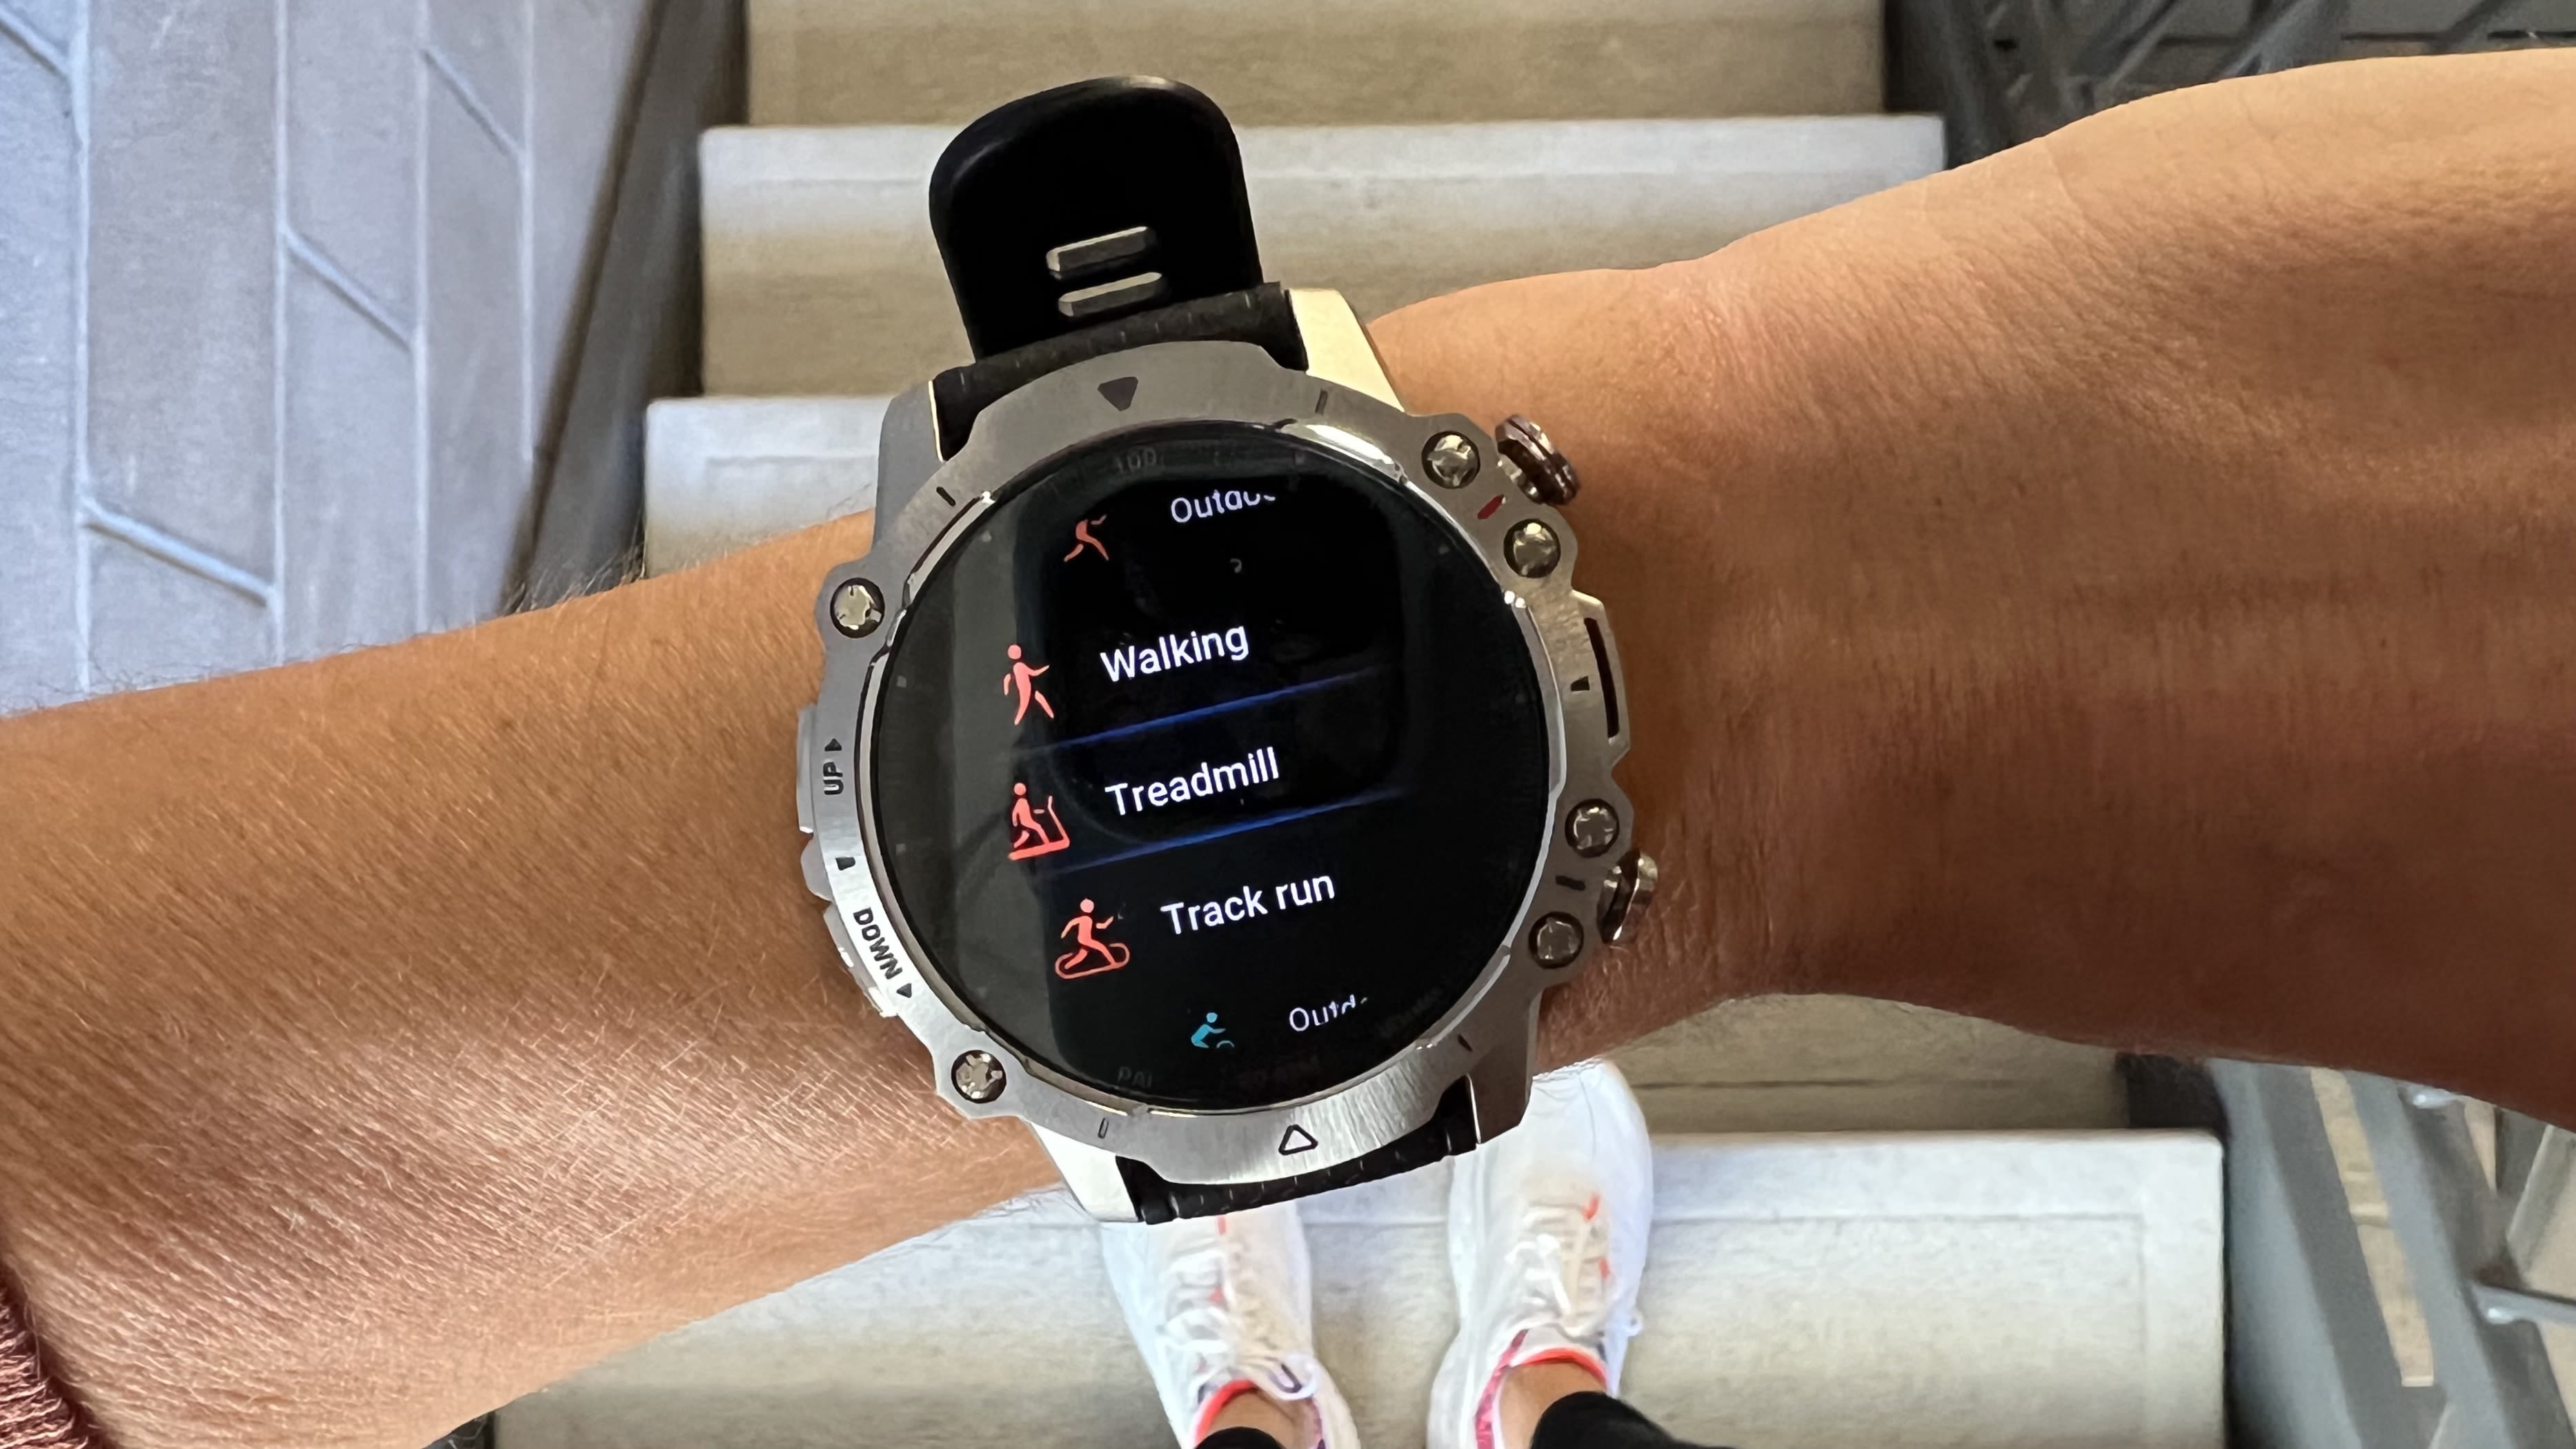 Amazfit Falcon, review and details